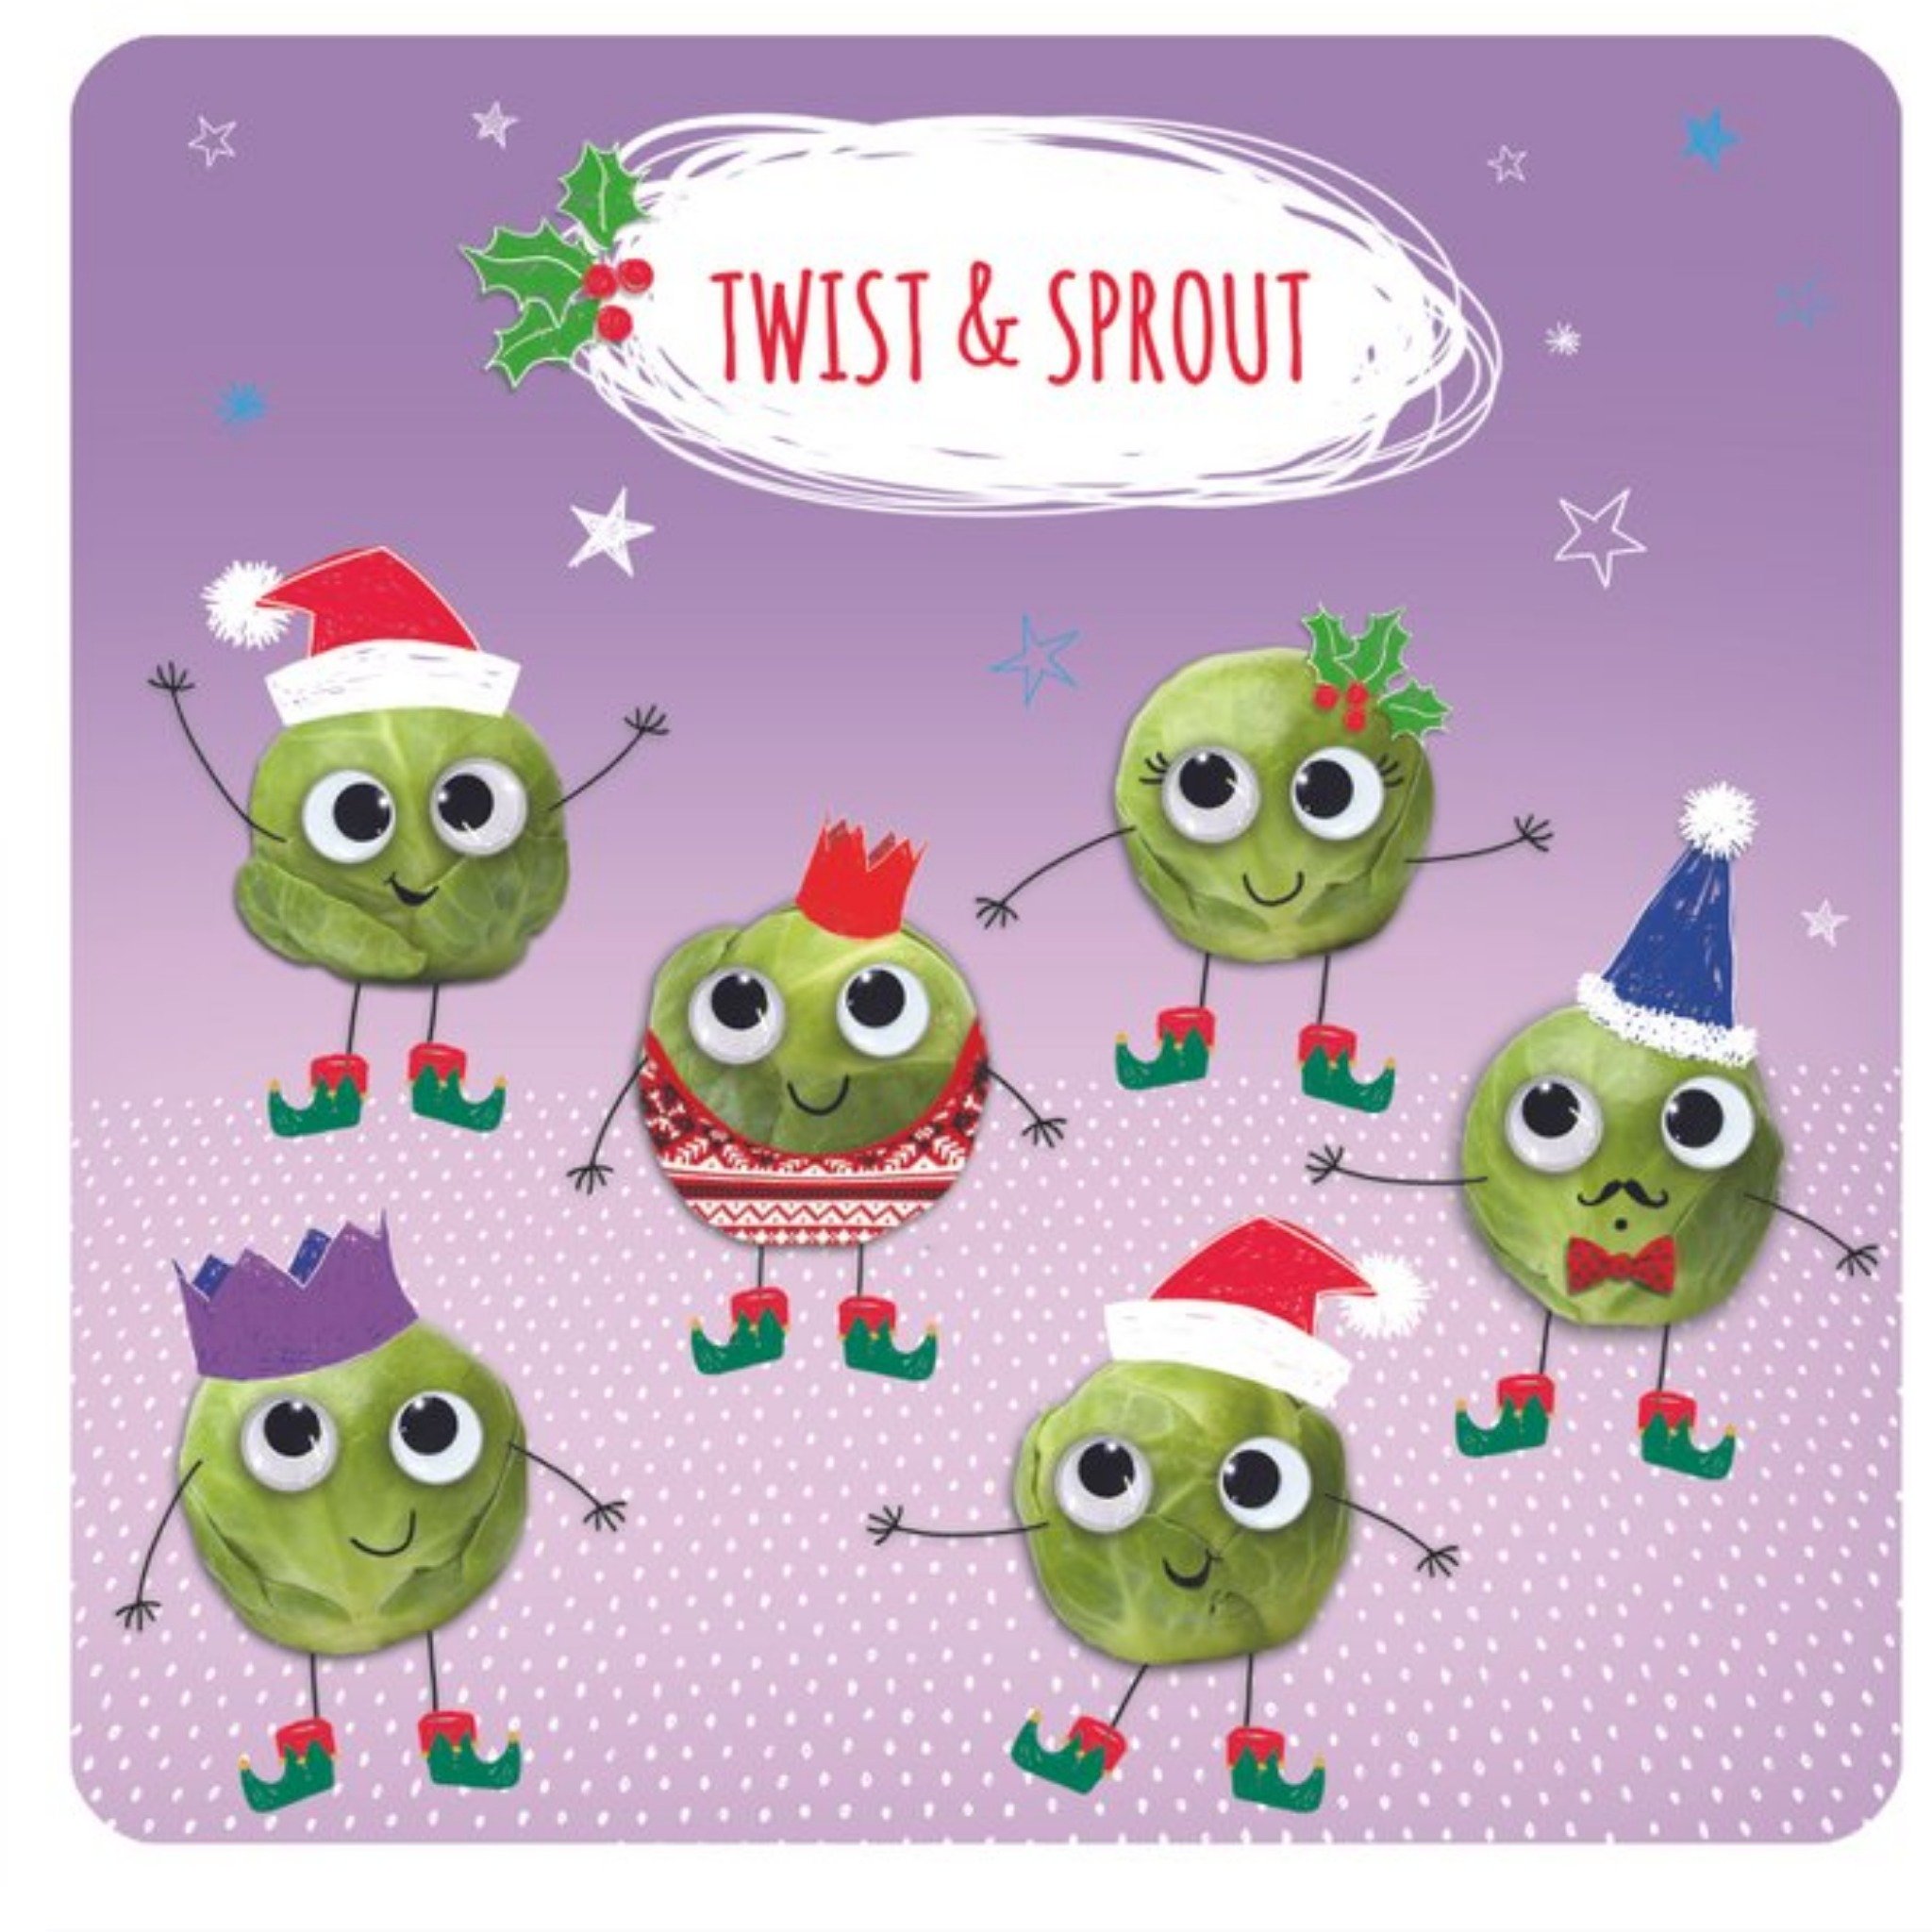 Moonpig Funny Brussels Sprouts Christmas Card, Square